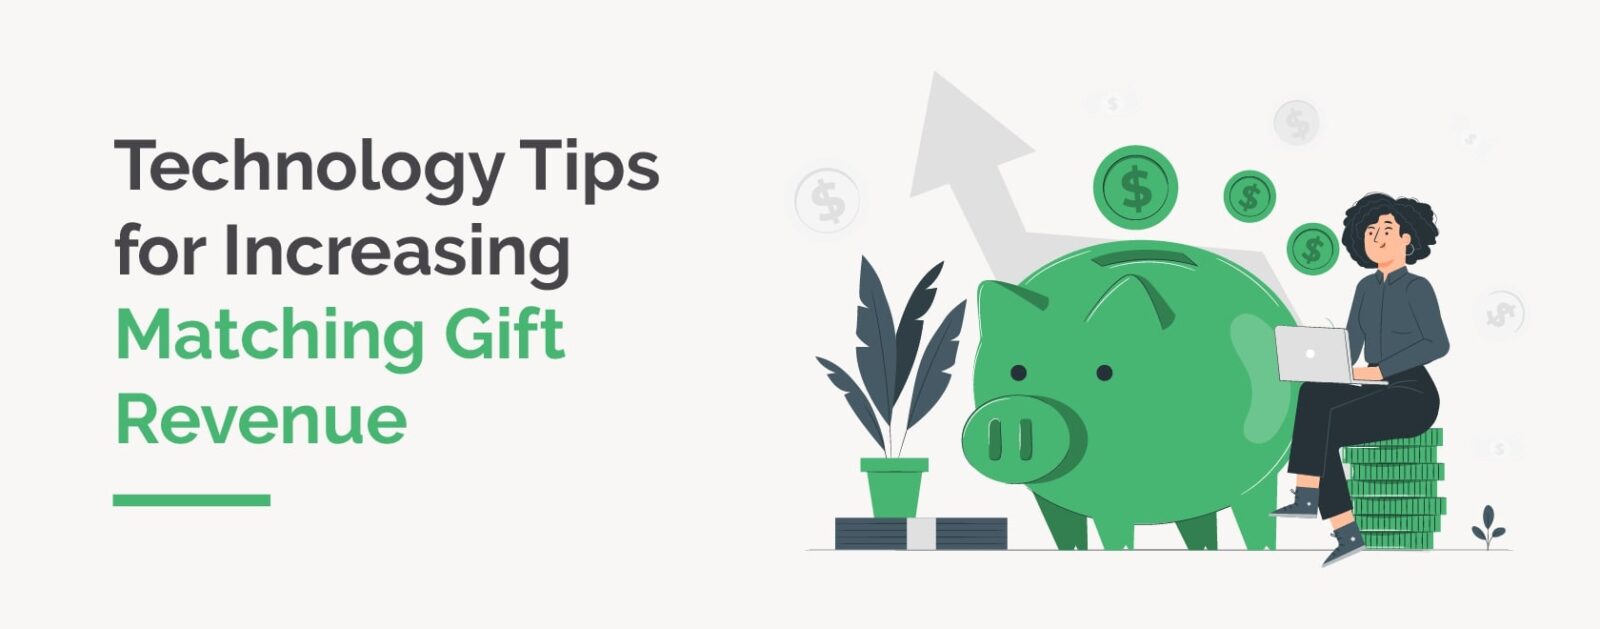 This guide shares tips for using technology to boost matching gift revenue for nonprofits.